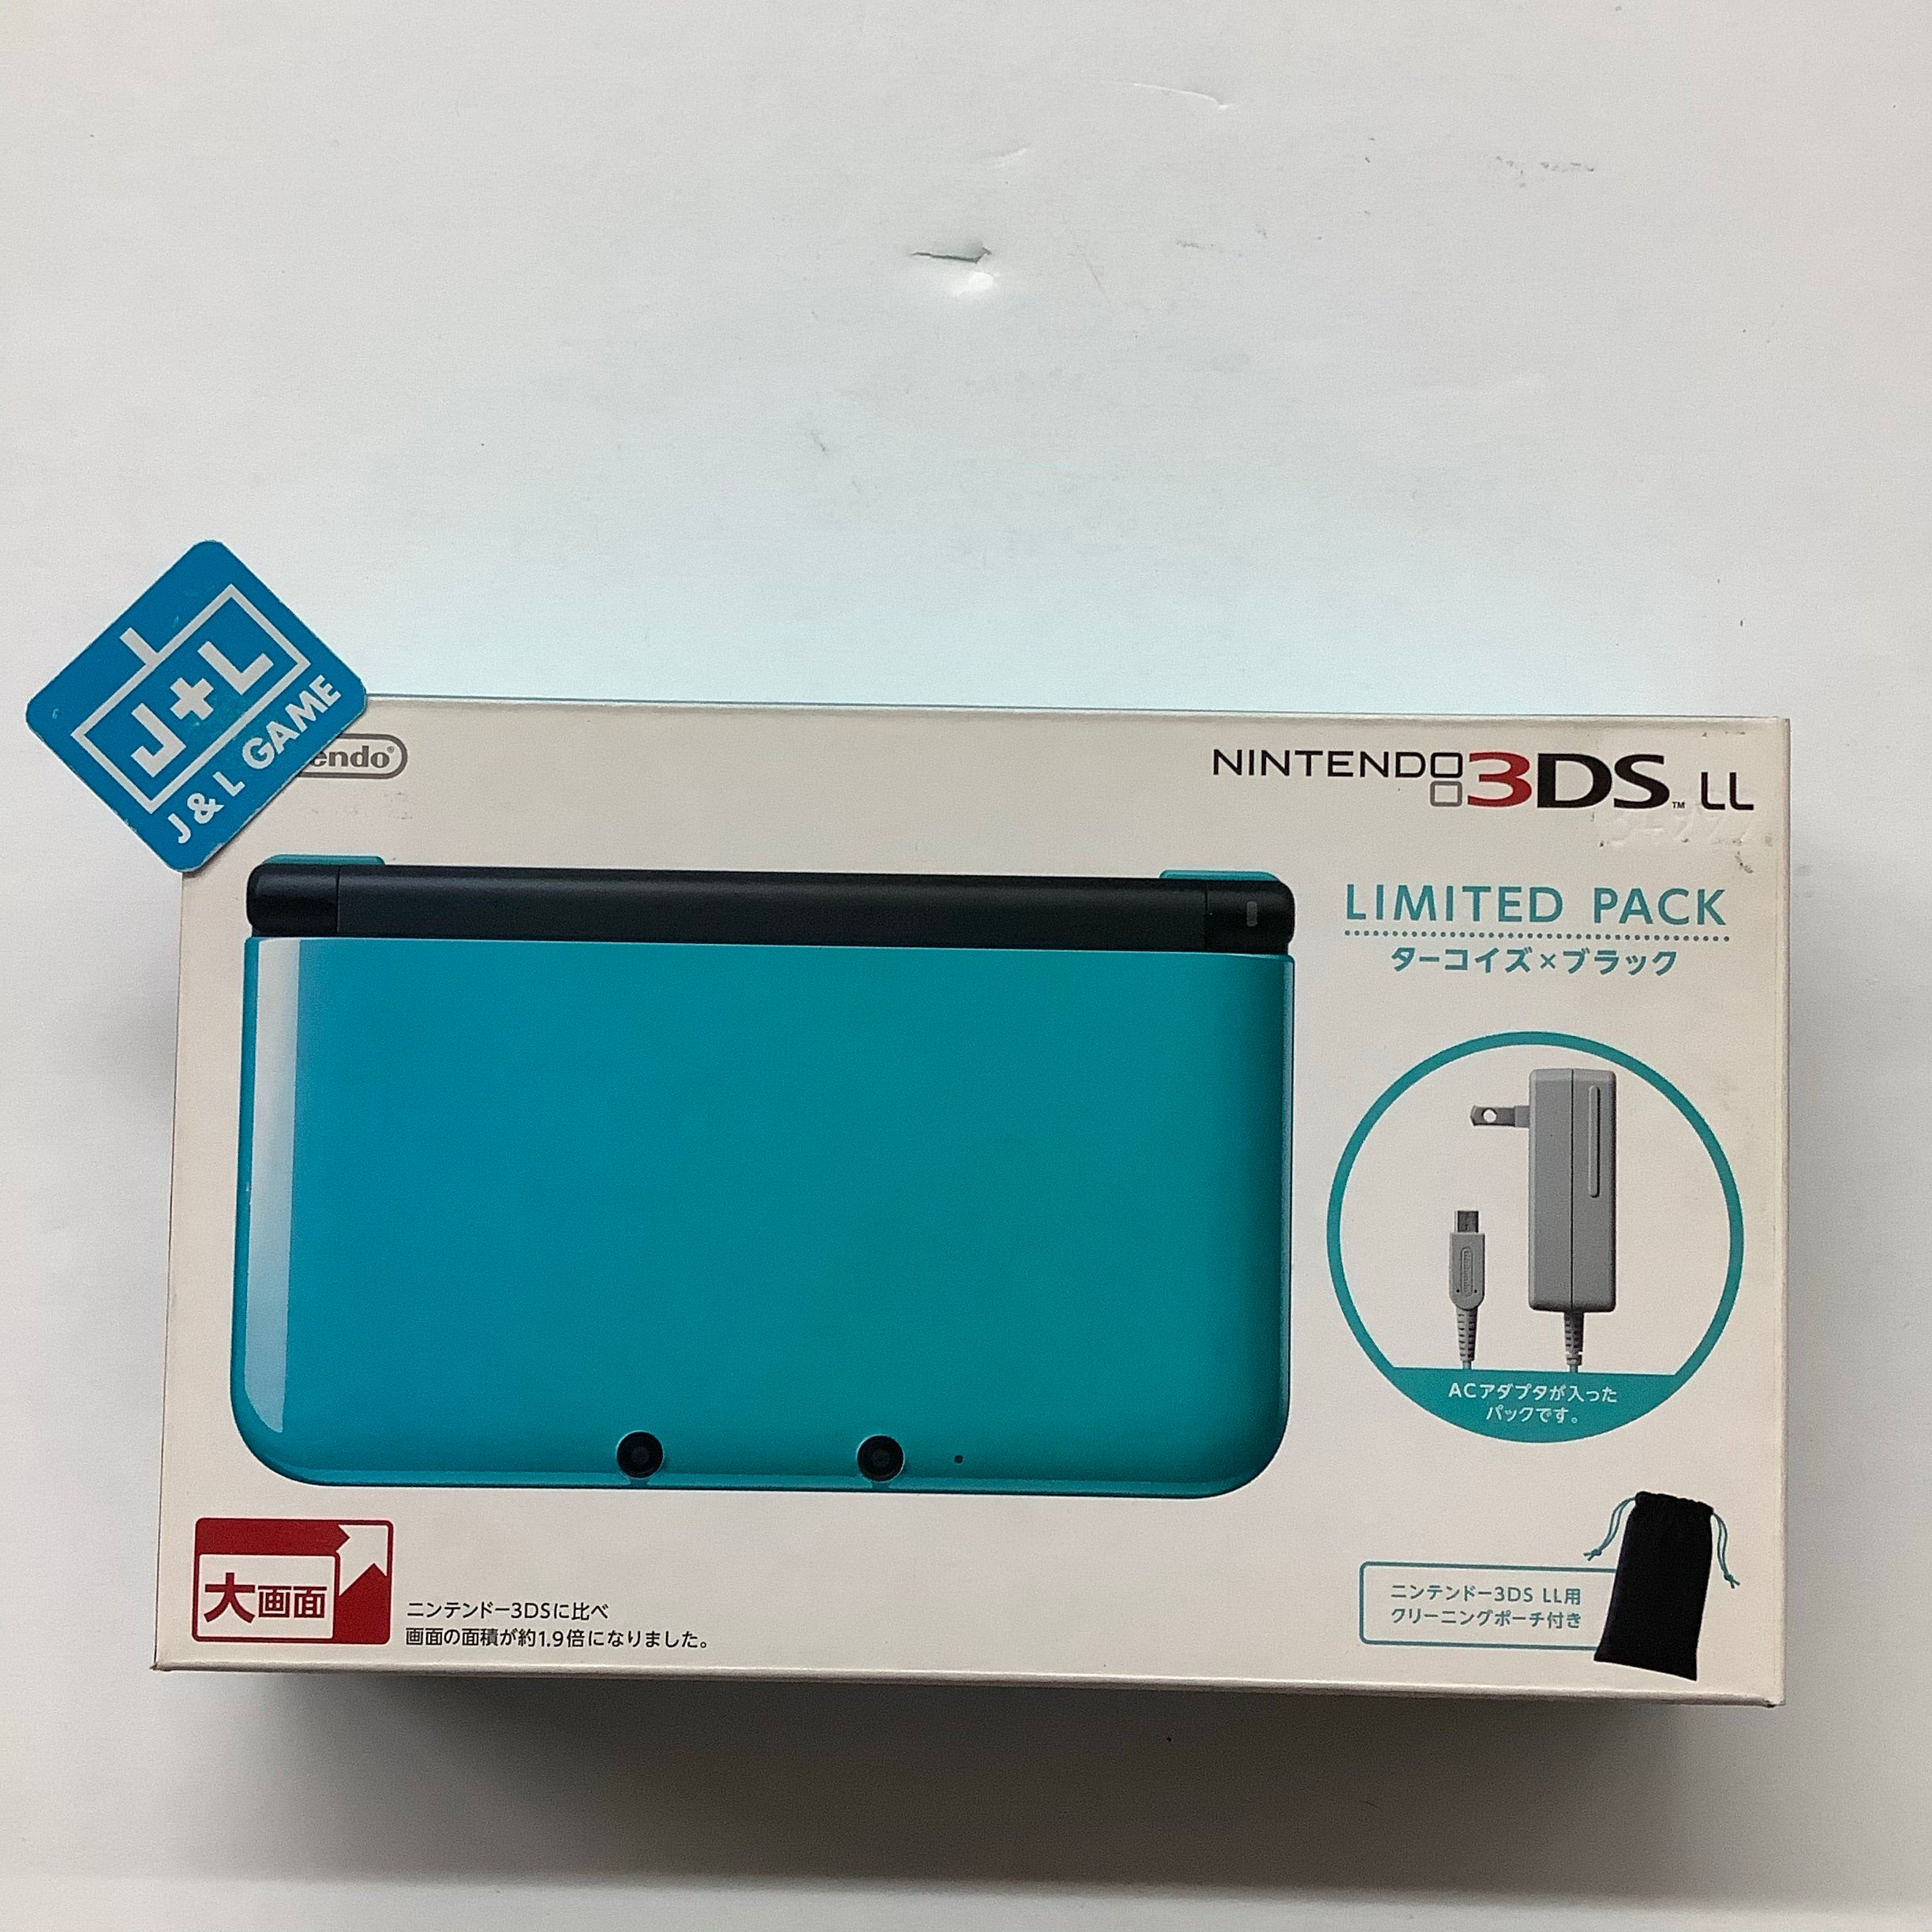 Nintendo 3DS LL Limited Pack Turquoise X Black - Nintendo 3DS